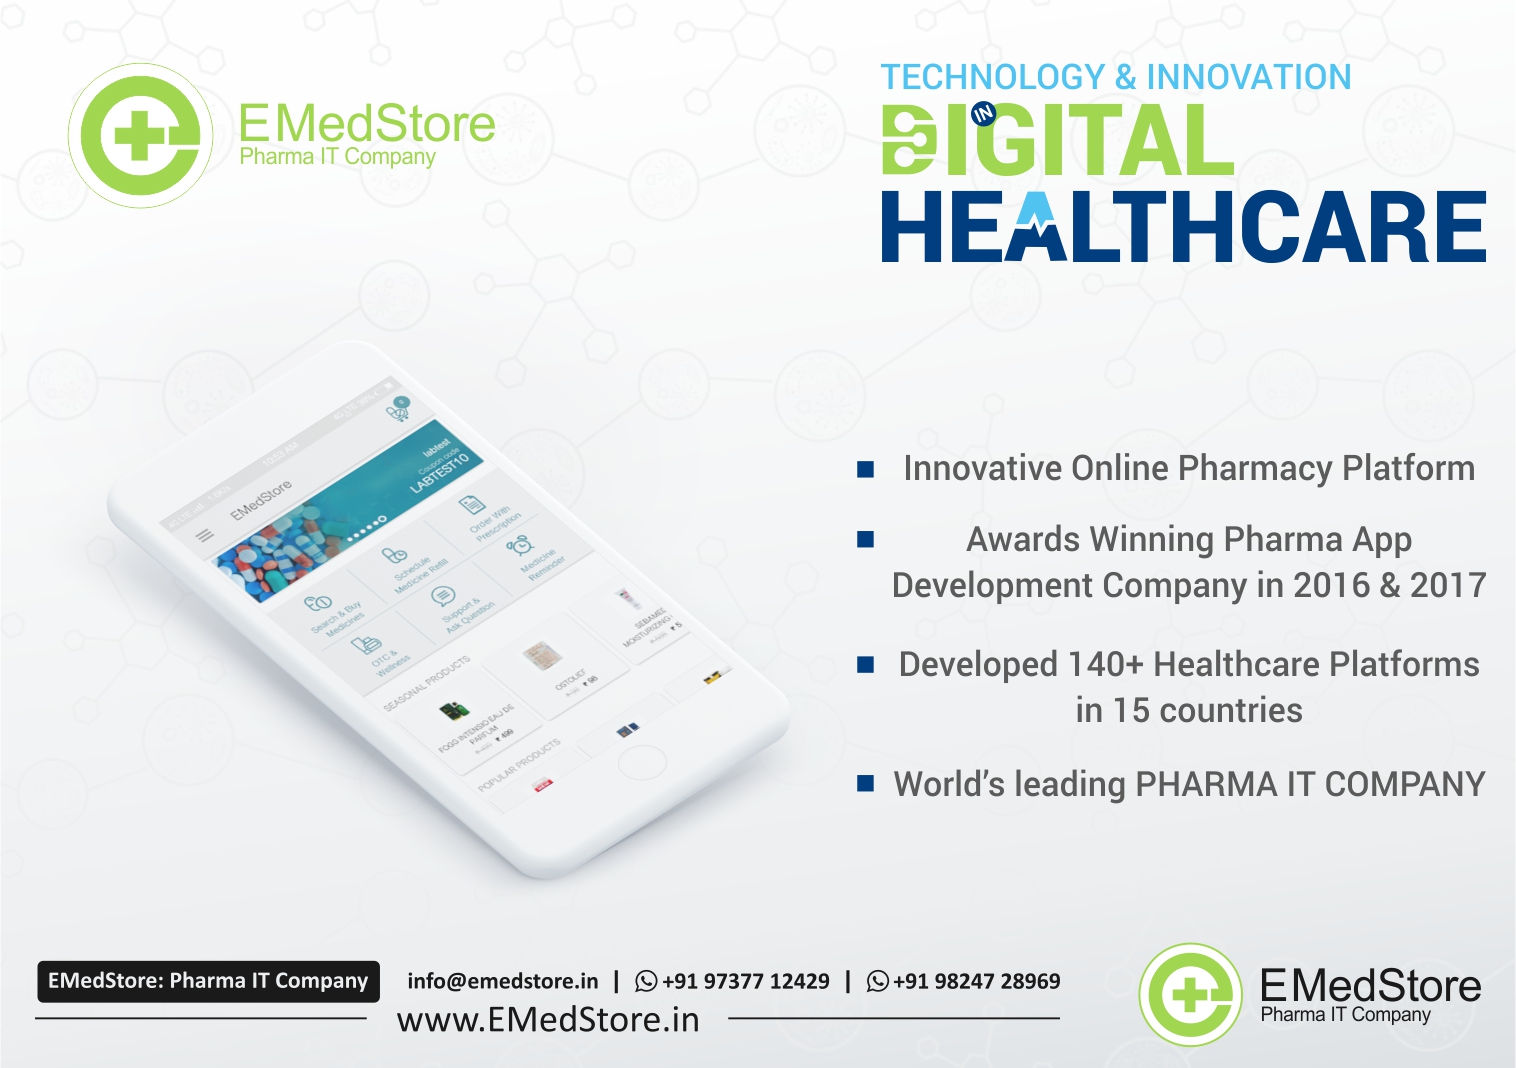 What make EMedStore a one stop destination for your pharmacy?